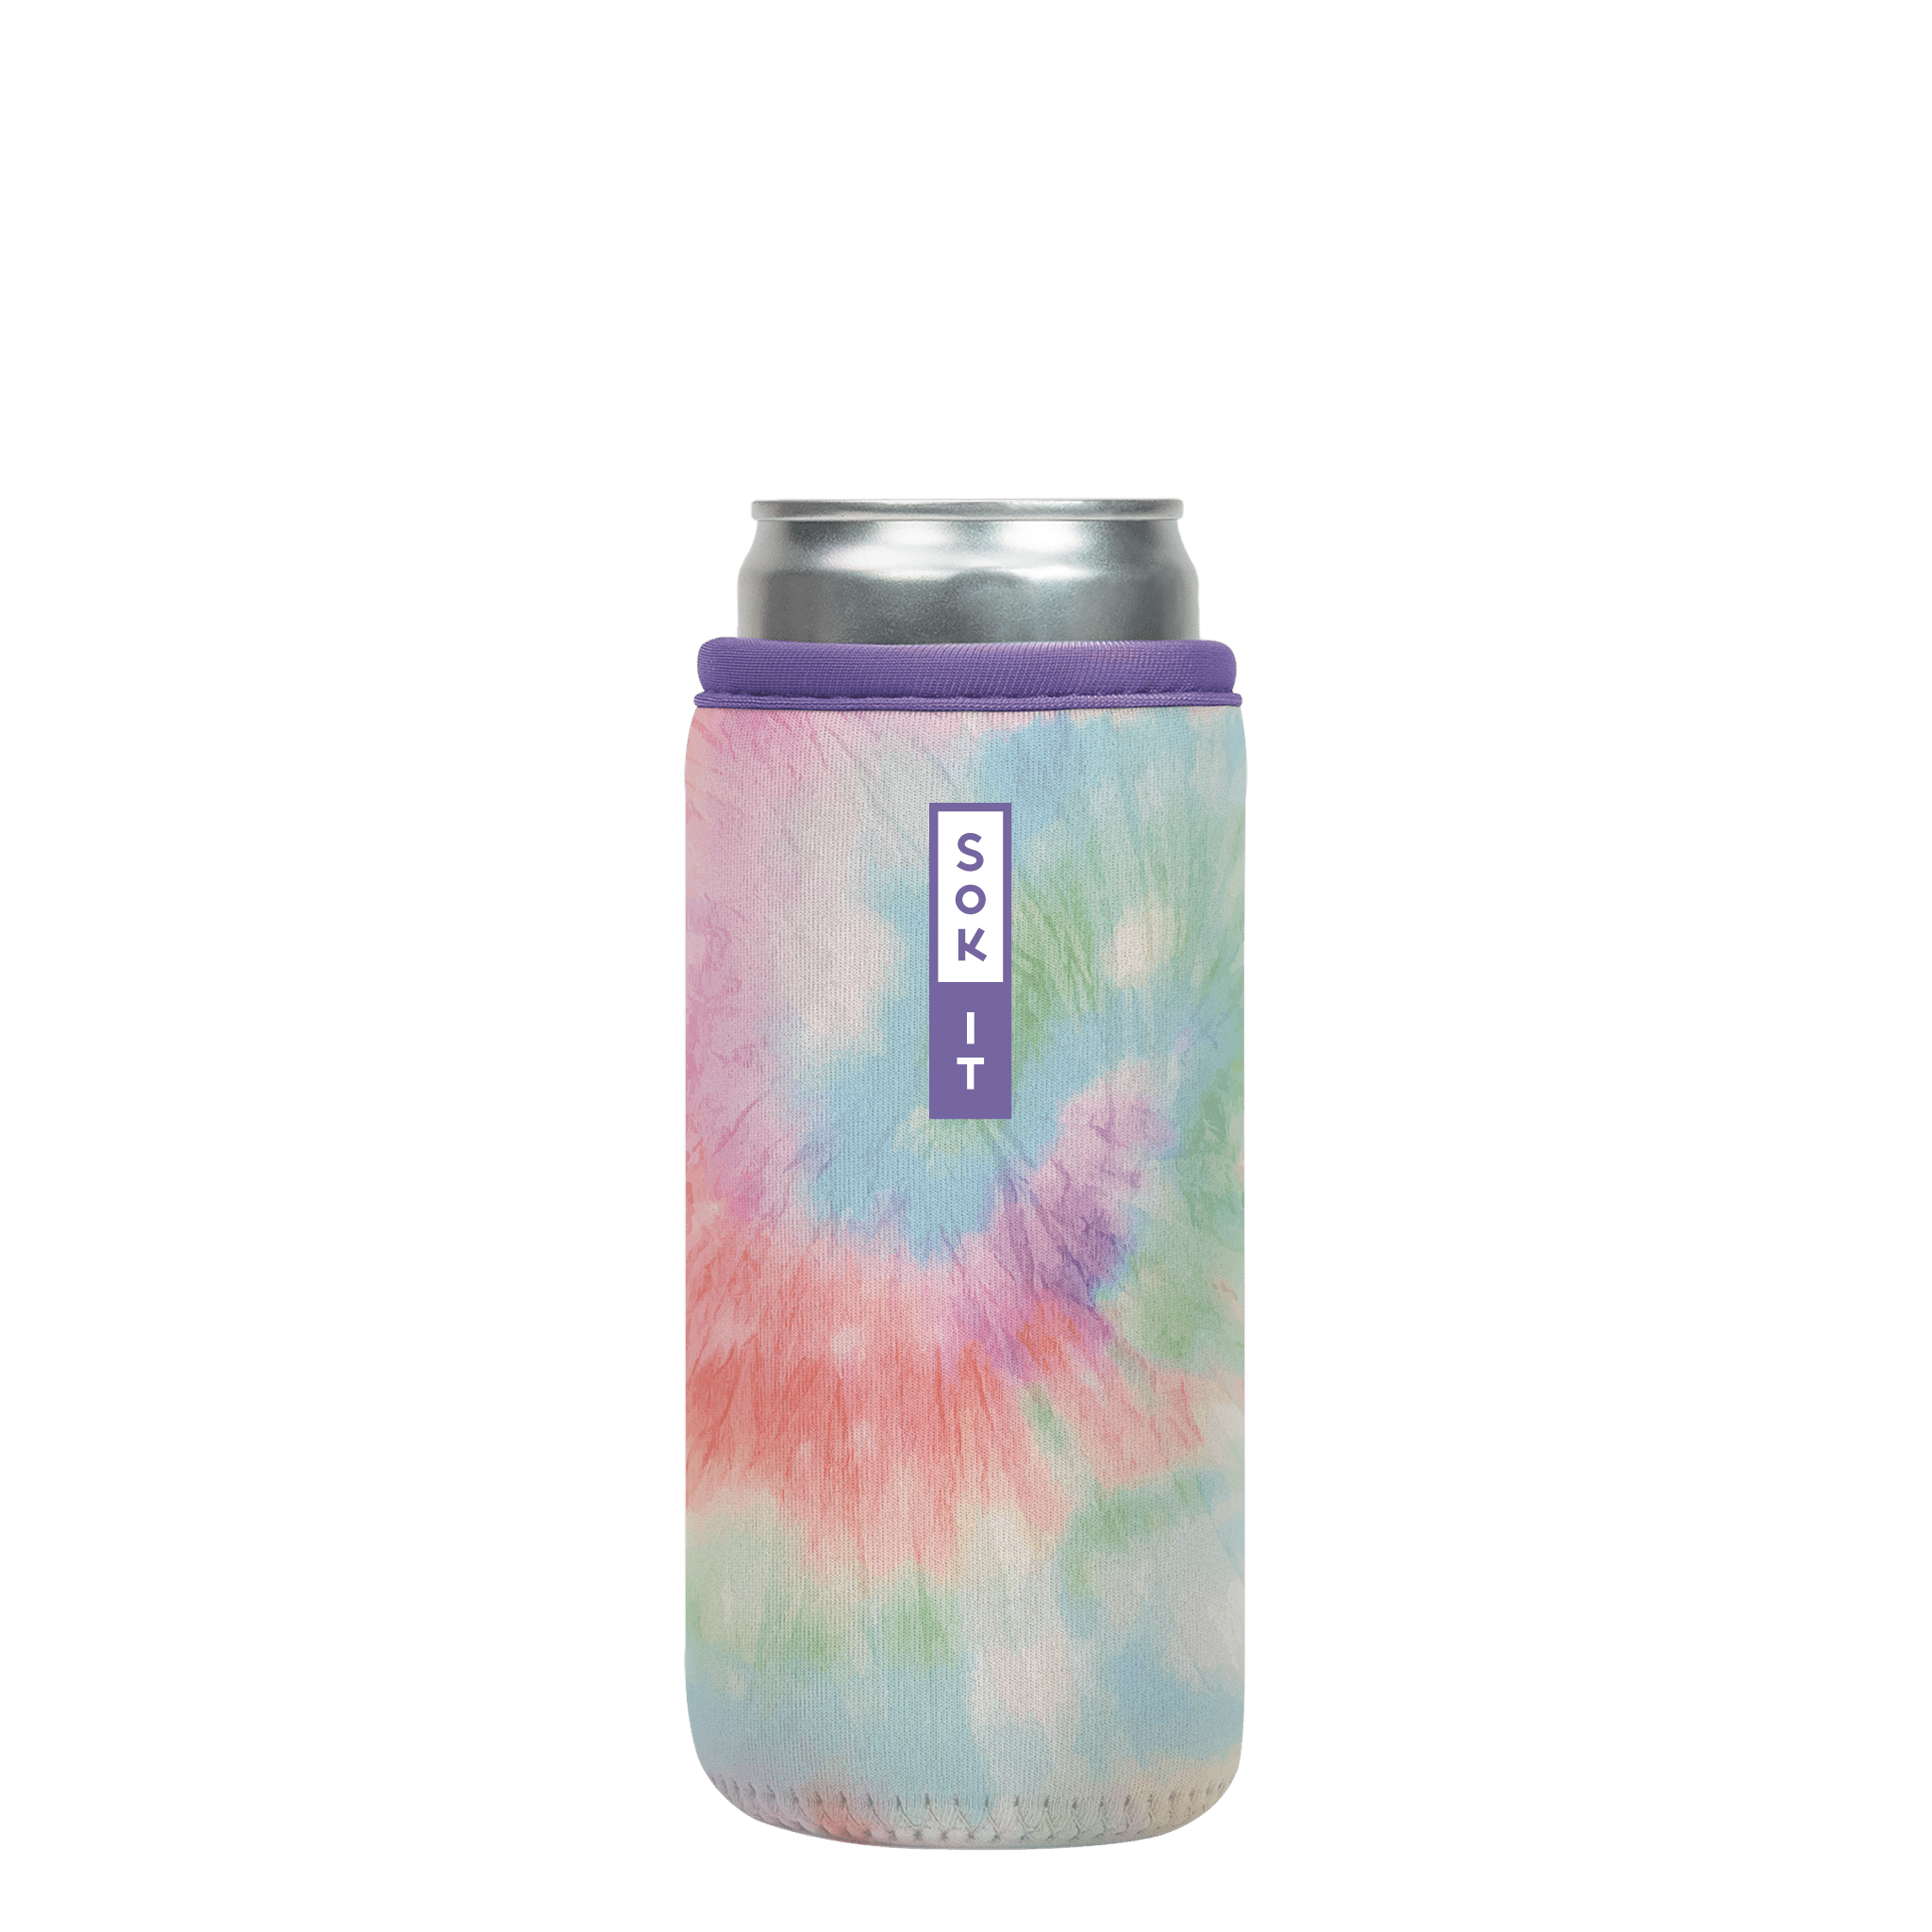 CanSok Daydreaming 12oz Slim Can